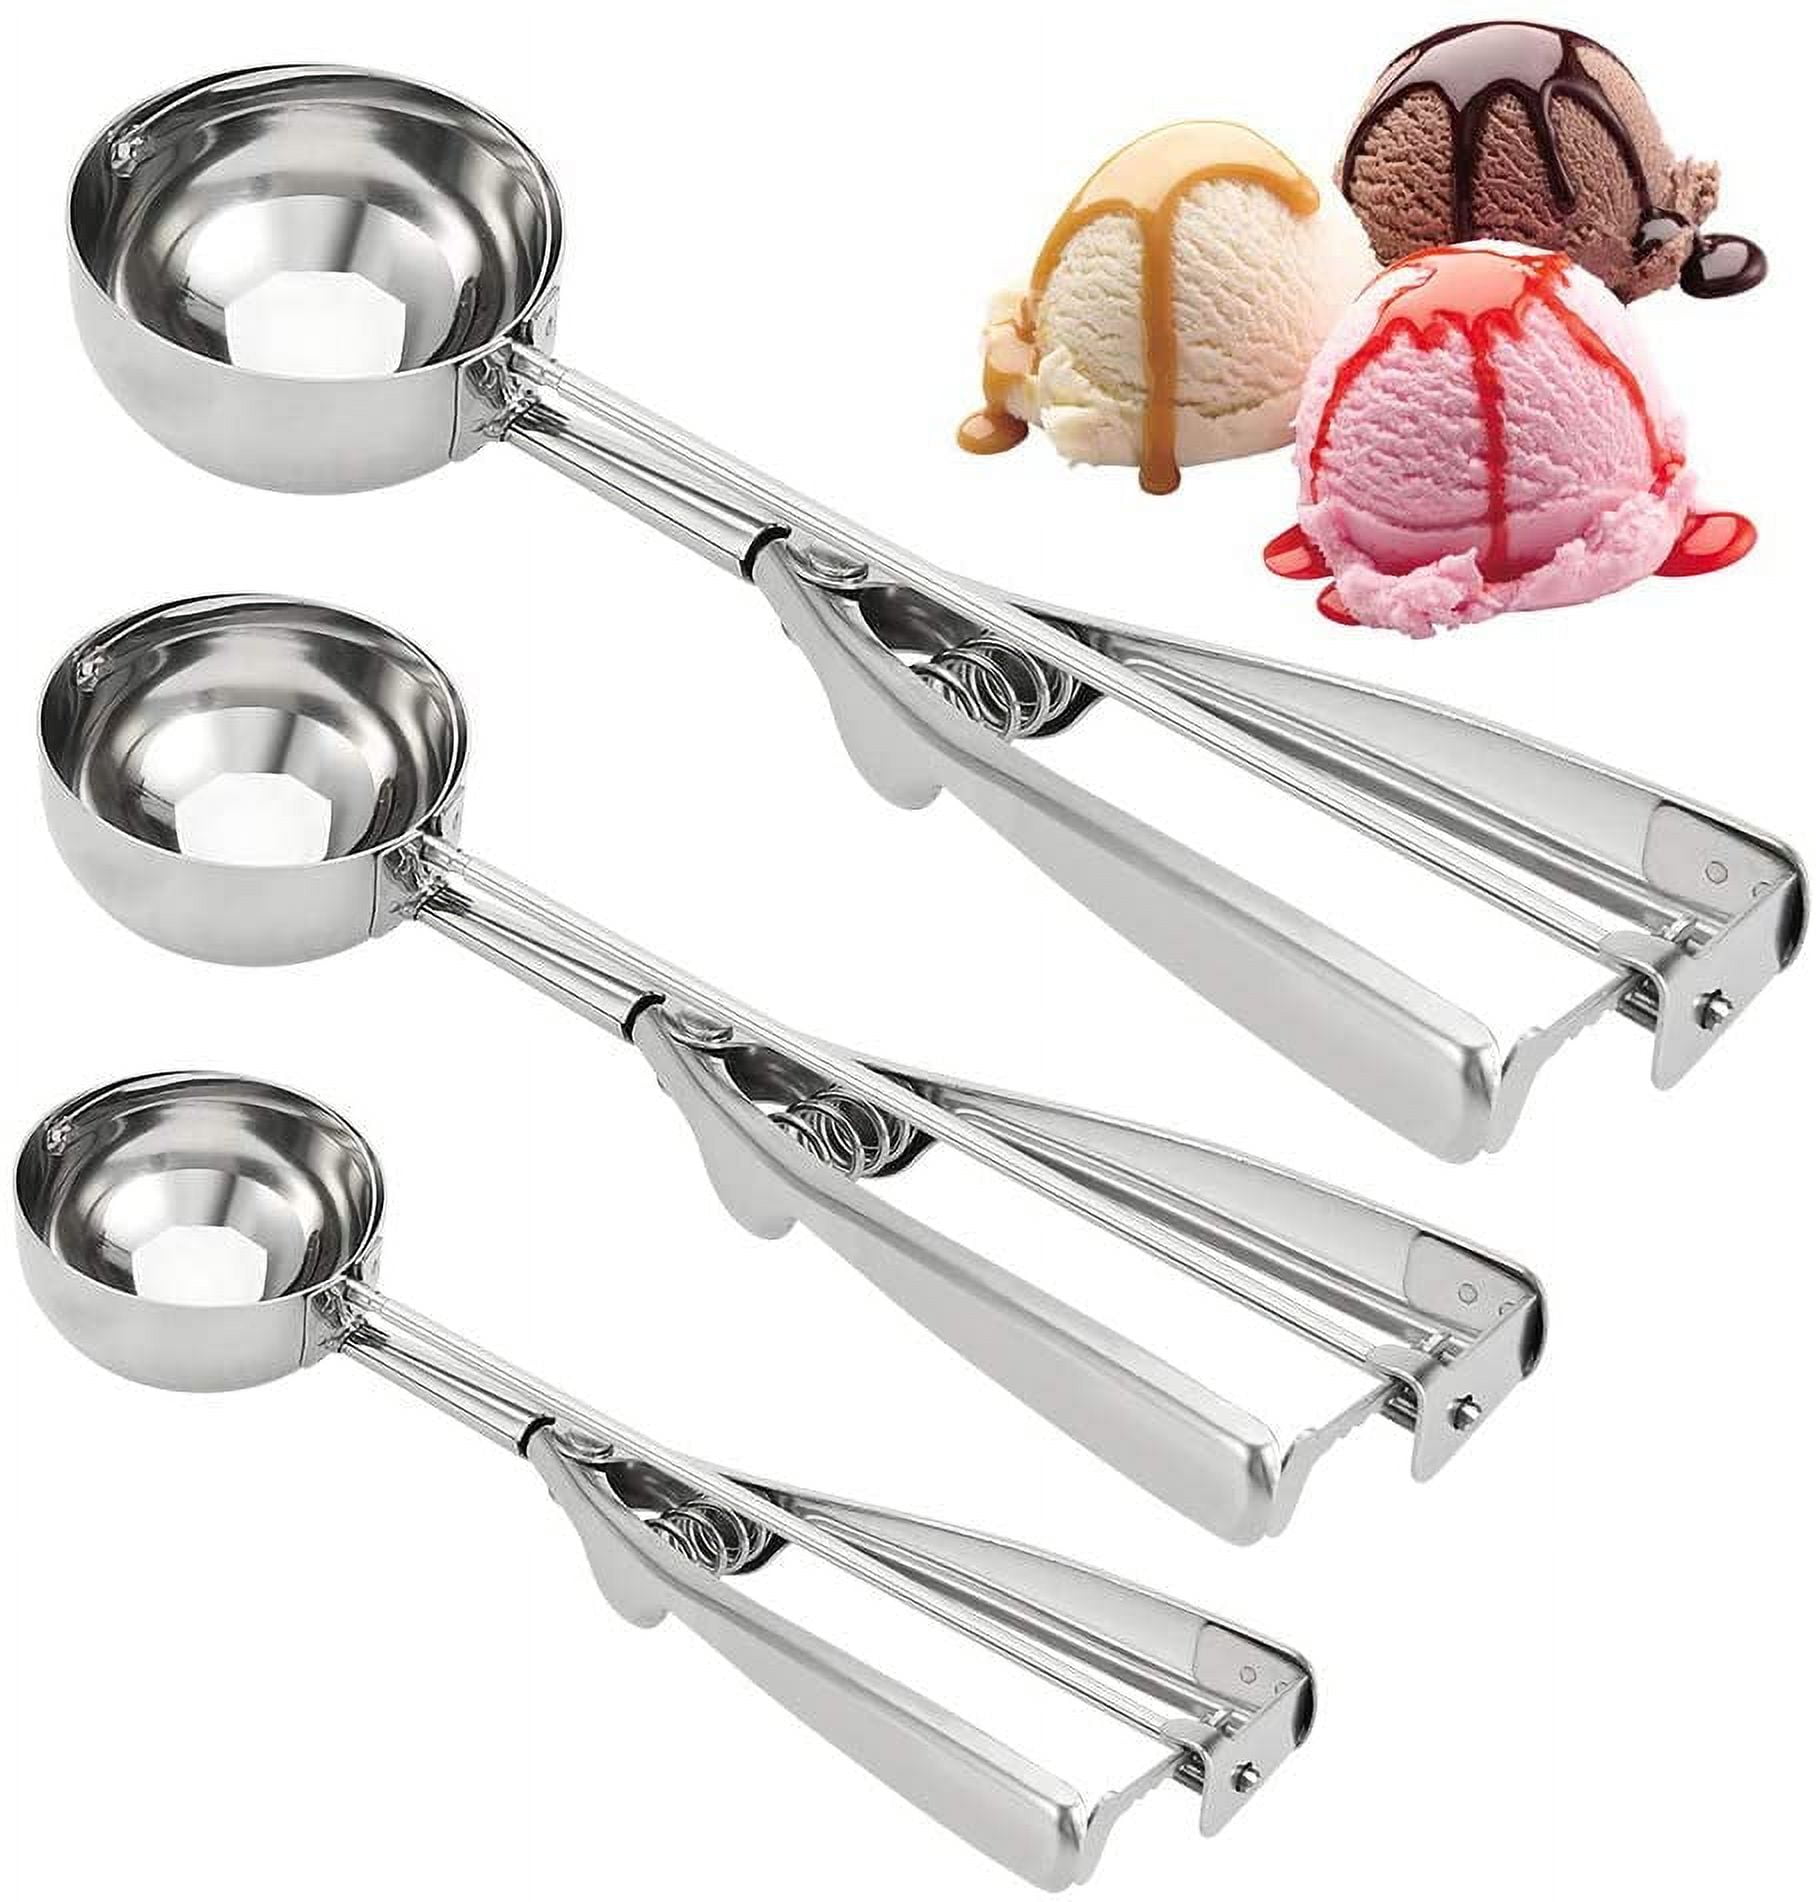 6 Ounce Ice Scoop Set of 2, VeSteel Small Stainless Steel Scoops for Ice  Cube/Candy/Flour/Sugar, Metal Utility Scoops for Canisters, Baking, Kitchen